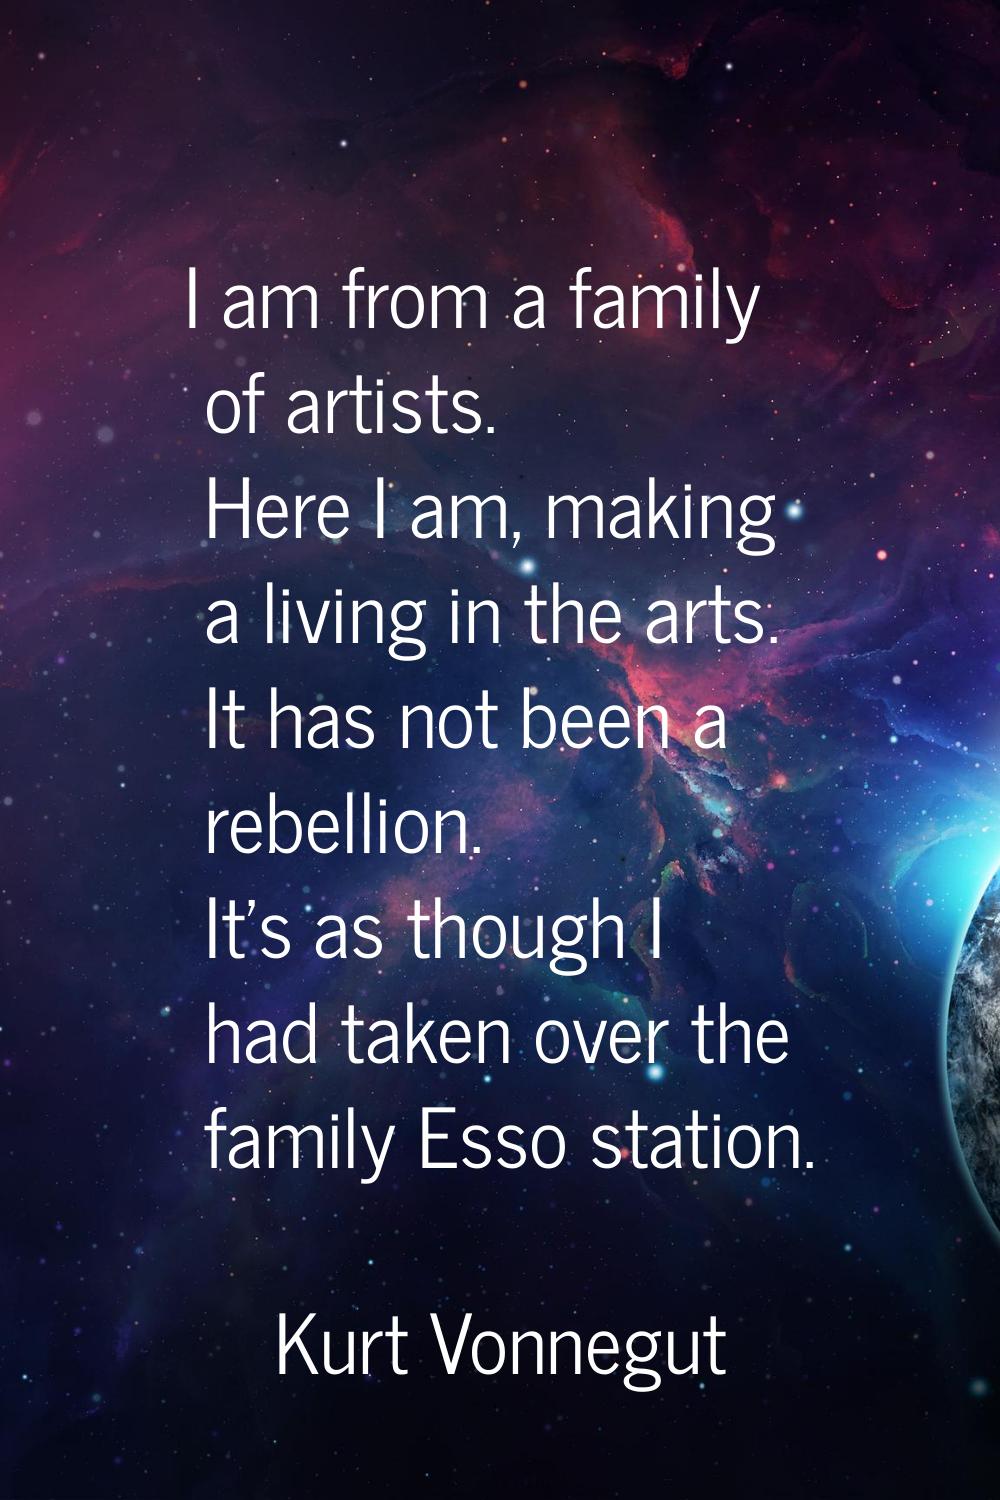 I am from a family of artists. Here I am, making a living in the arts. It has not been a rebellion.